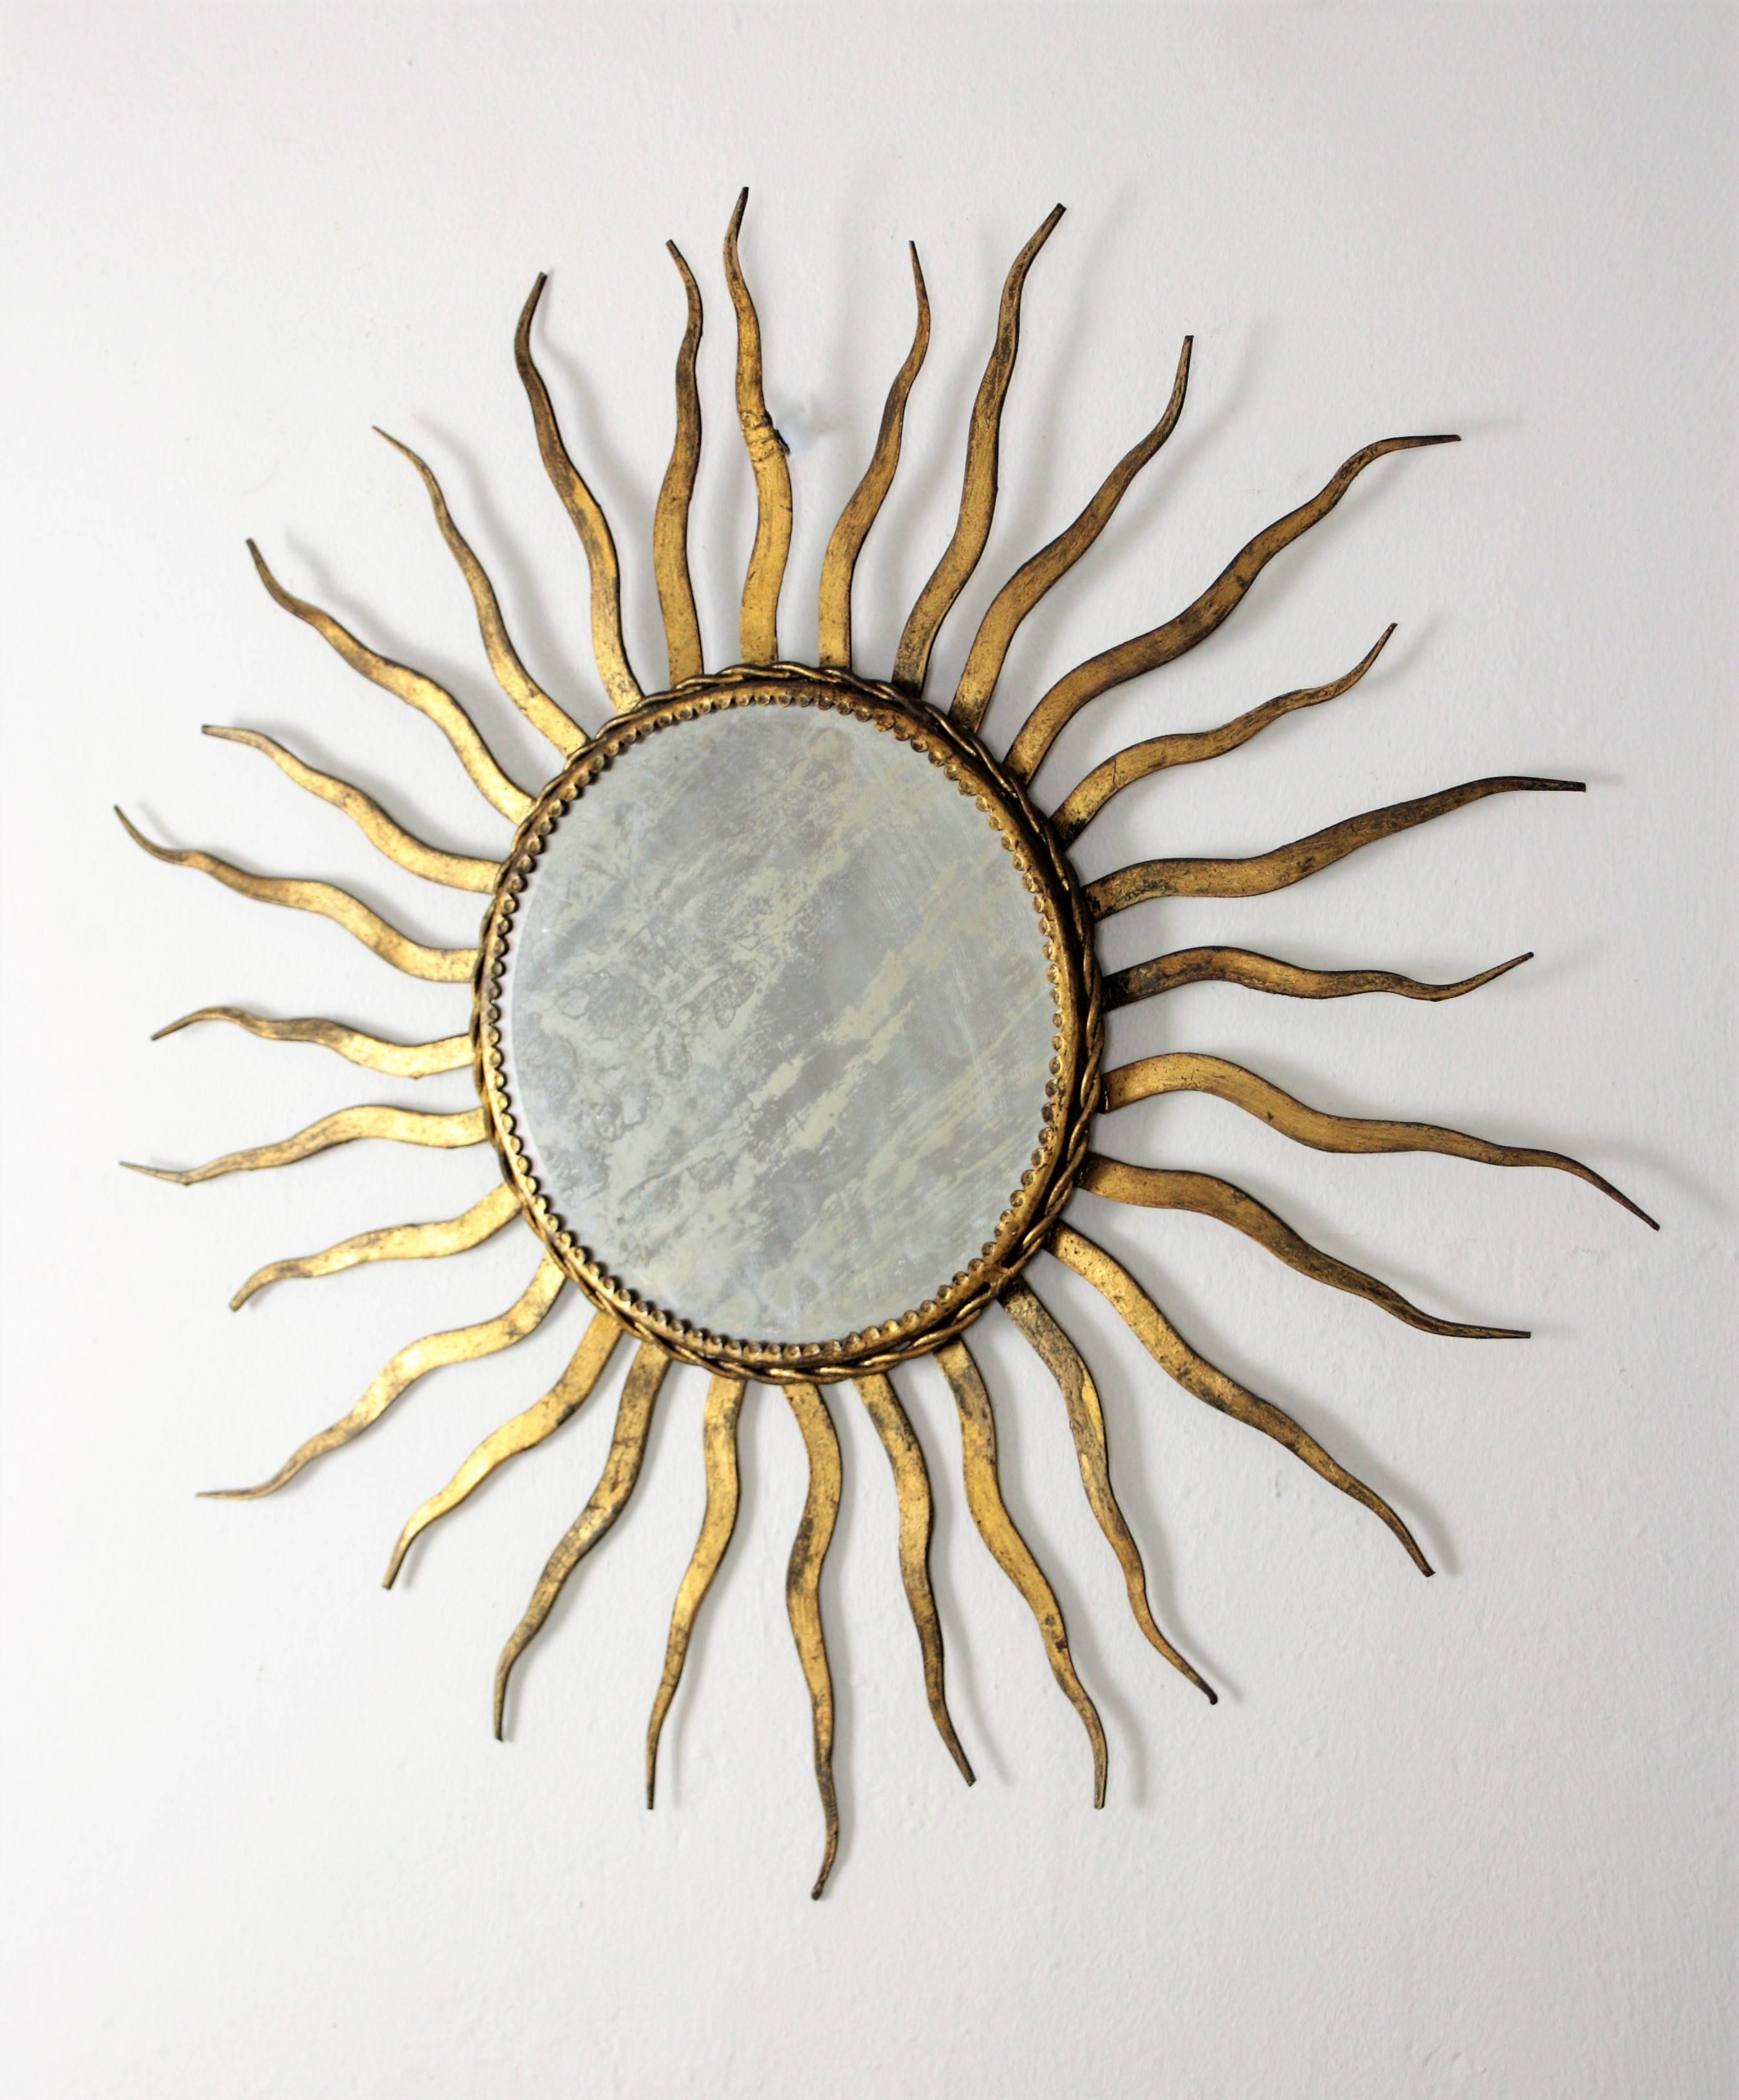 Hand-hammered iron sunburst mirror with original vintage patina in gold leaf finish. This mirror wears its original beveled glass and has all the taste of the Gilbert Poillerat style.
France, 1950s-1960s.
A beautiful piece to place alone or in a